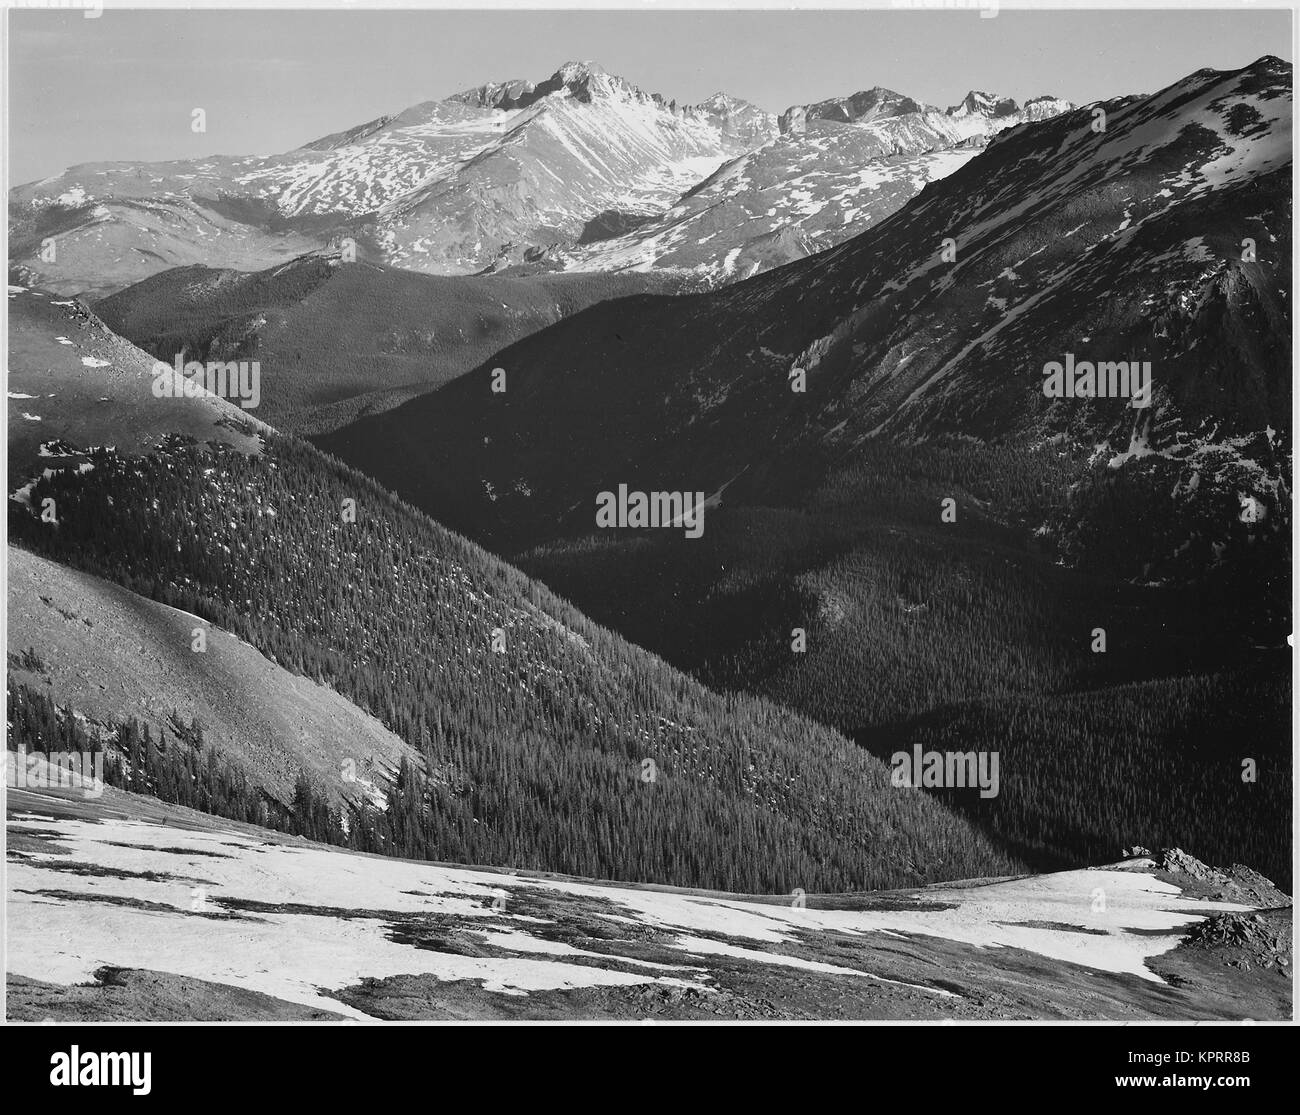 Close in view dark shadowed hills in foreground mountains in background 'Long's Peak Rocky Mountain National Park' Colorado. 1933 - 1942 Stock Photo